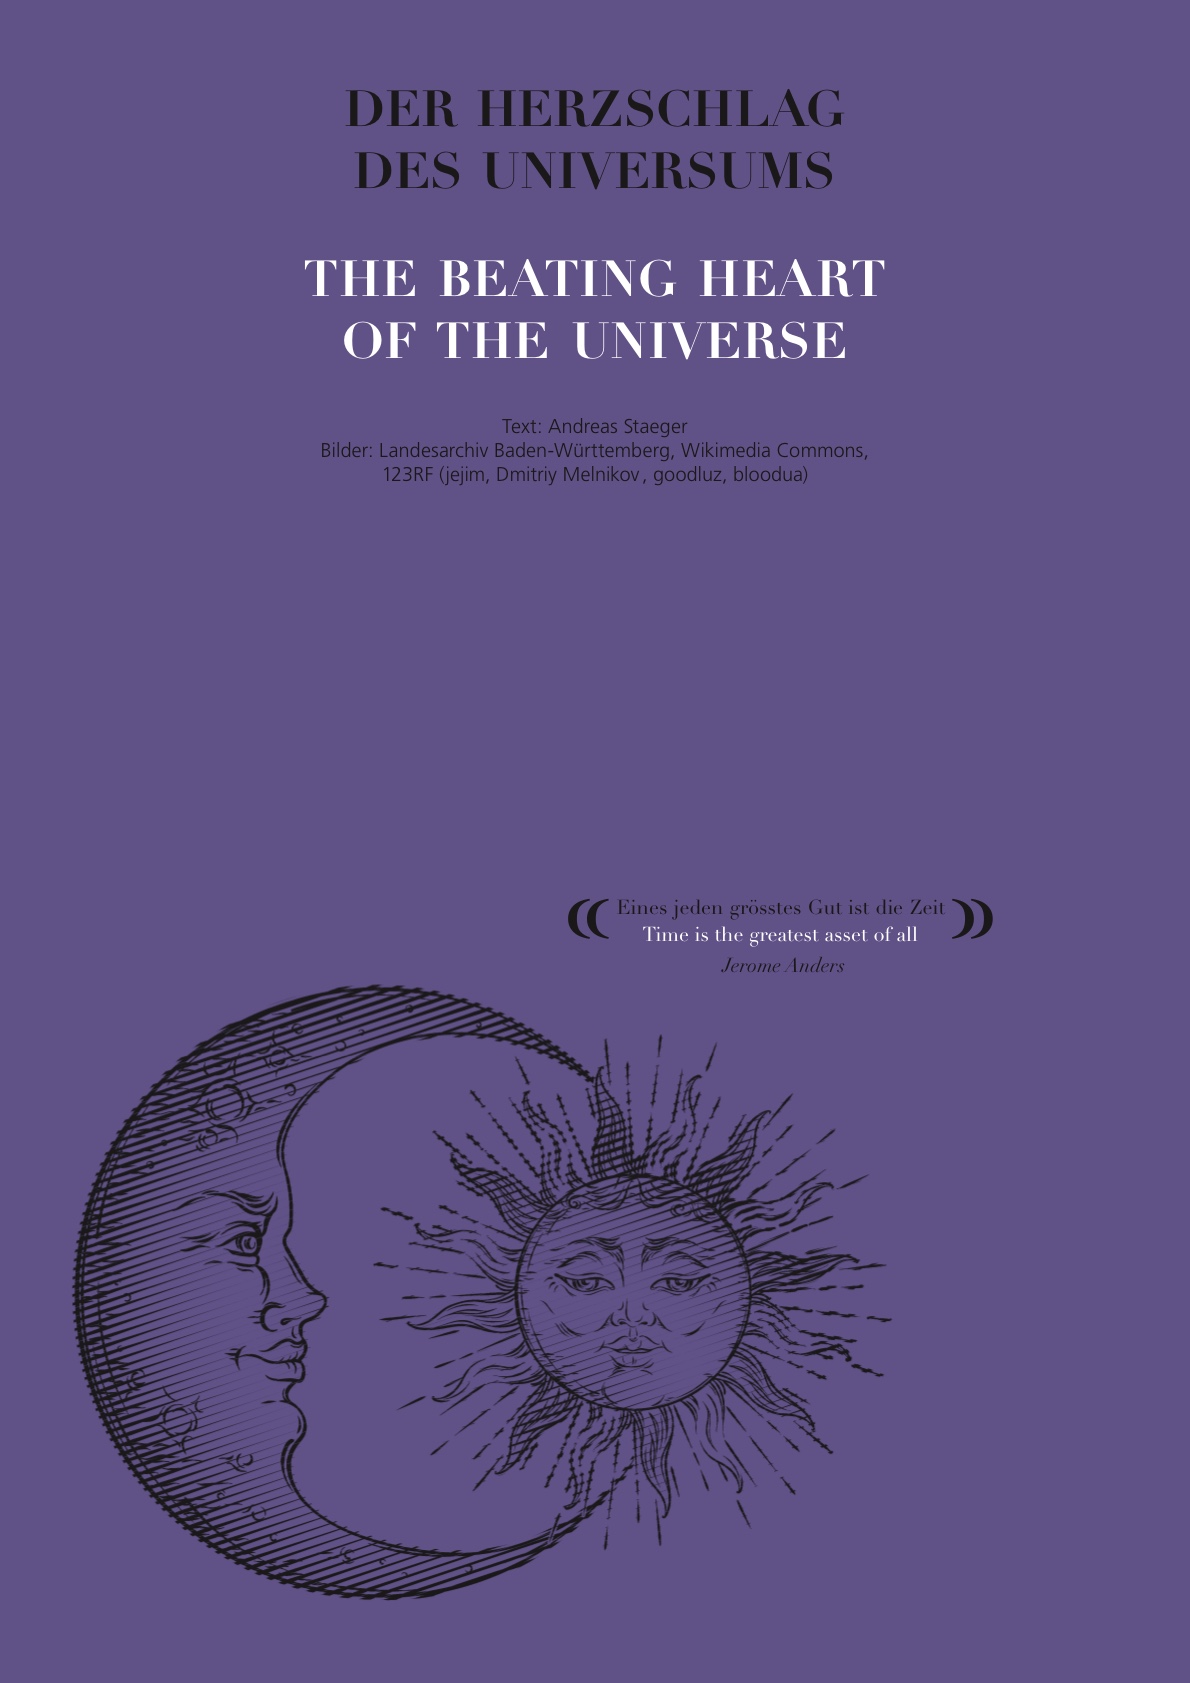 The beating heart of the universe | Top Magazin